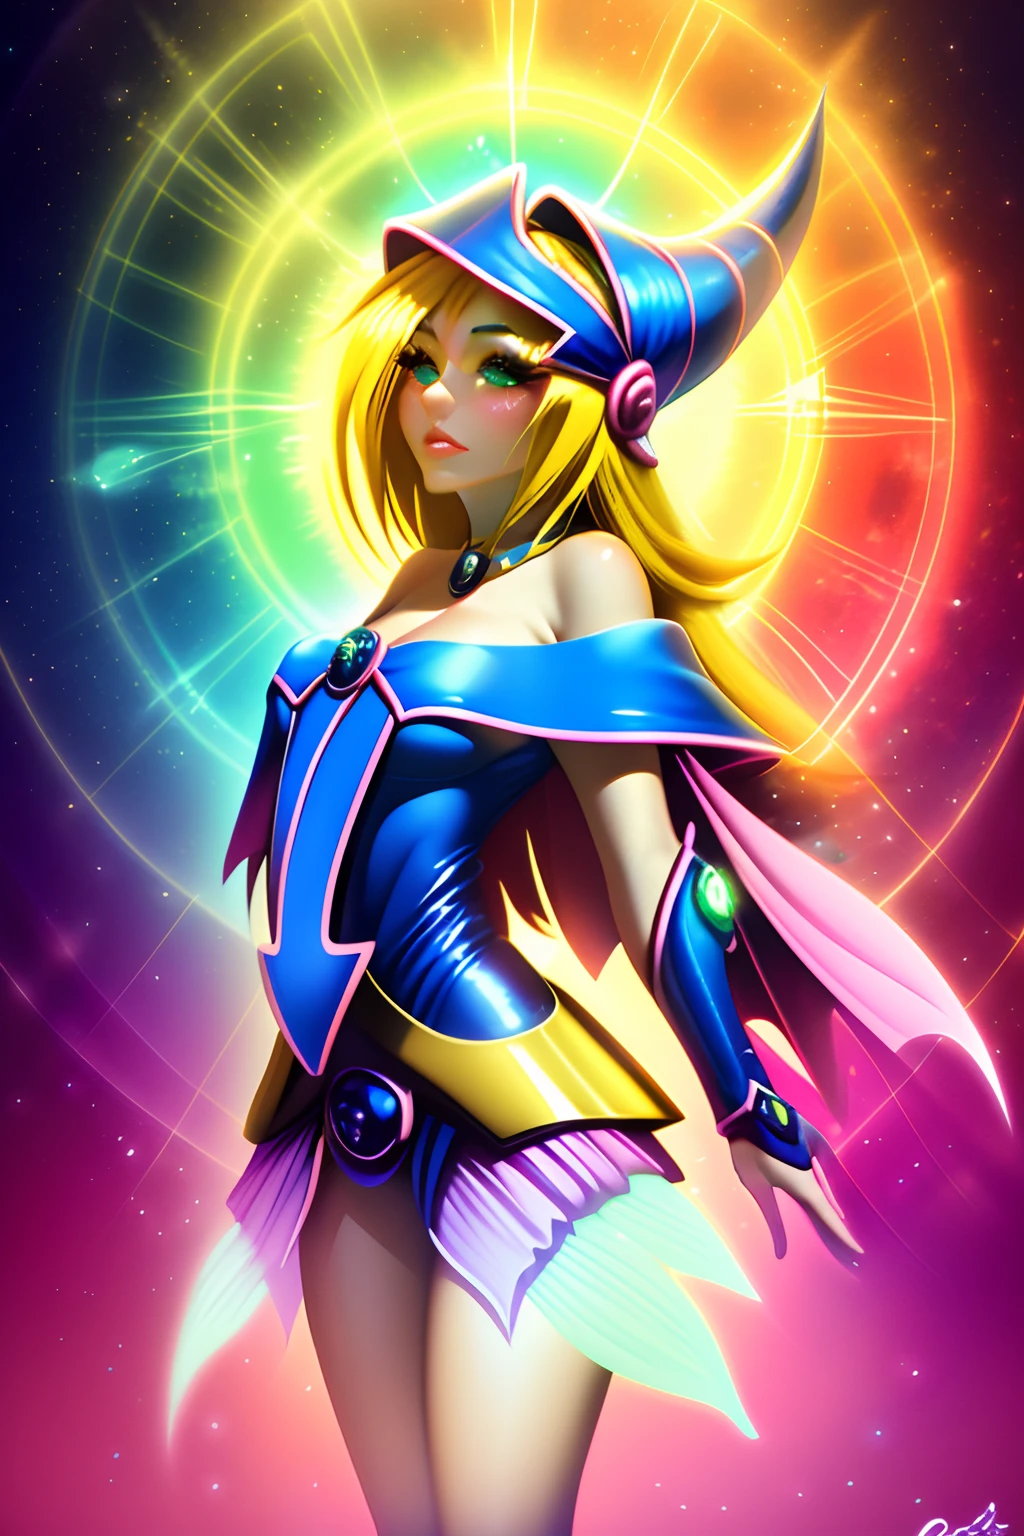 ((The best quality)), ((Masterpiece)), ((realist)), portrait, dark magician gils.
1girl, celestial, Deity, goddess, light particles, halo, looking at the viewer,
(bioluminiscente:0.95), Vibrant, colorido, color, (resplendent, glow),
(beautiful composition), cinematic lighting, intricate, (symmetrical:0.5), capricious,